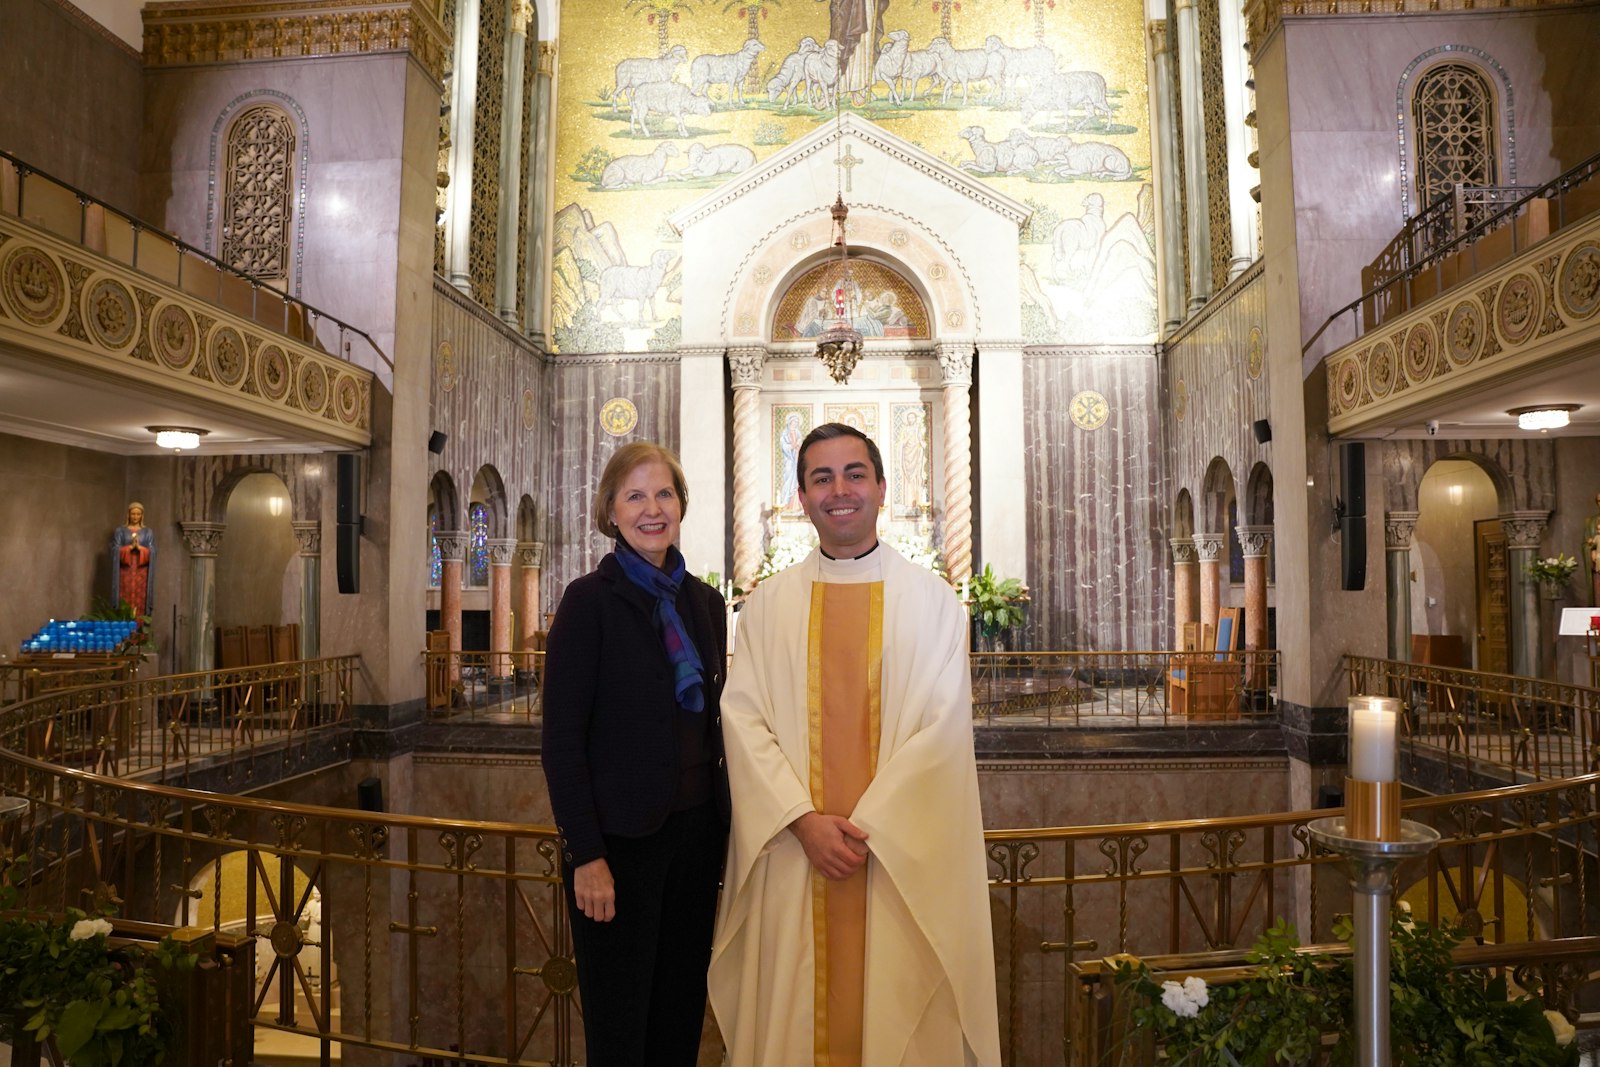 Fr. Amore stands with Hildreth Meiere Dunn, whose grandmother (Hildreth Meiere) designed the mosaic of Christ the Good Shepherd that’s behind St. Aloysius’ high altar.